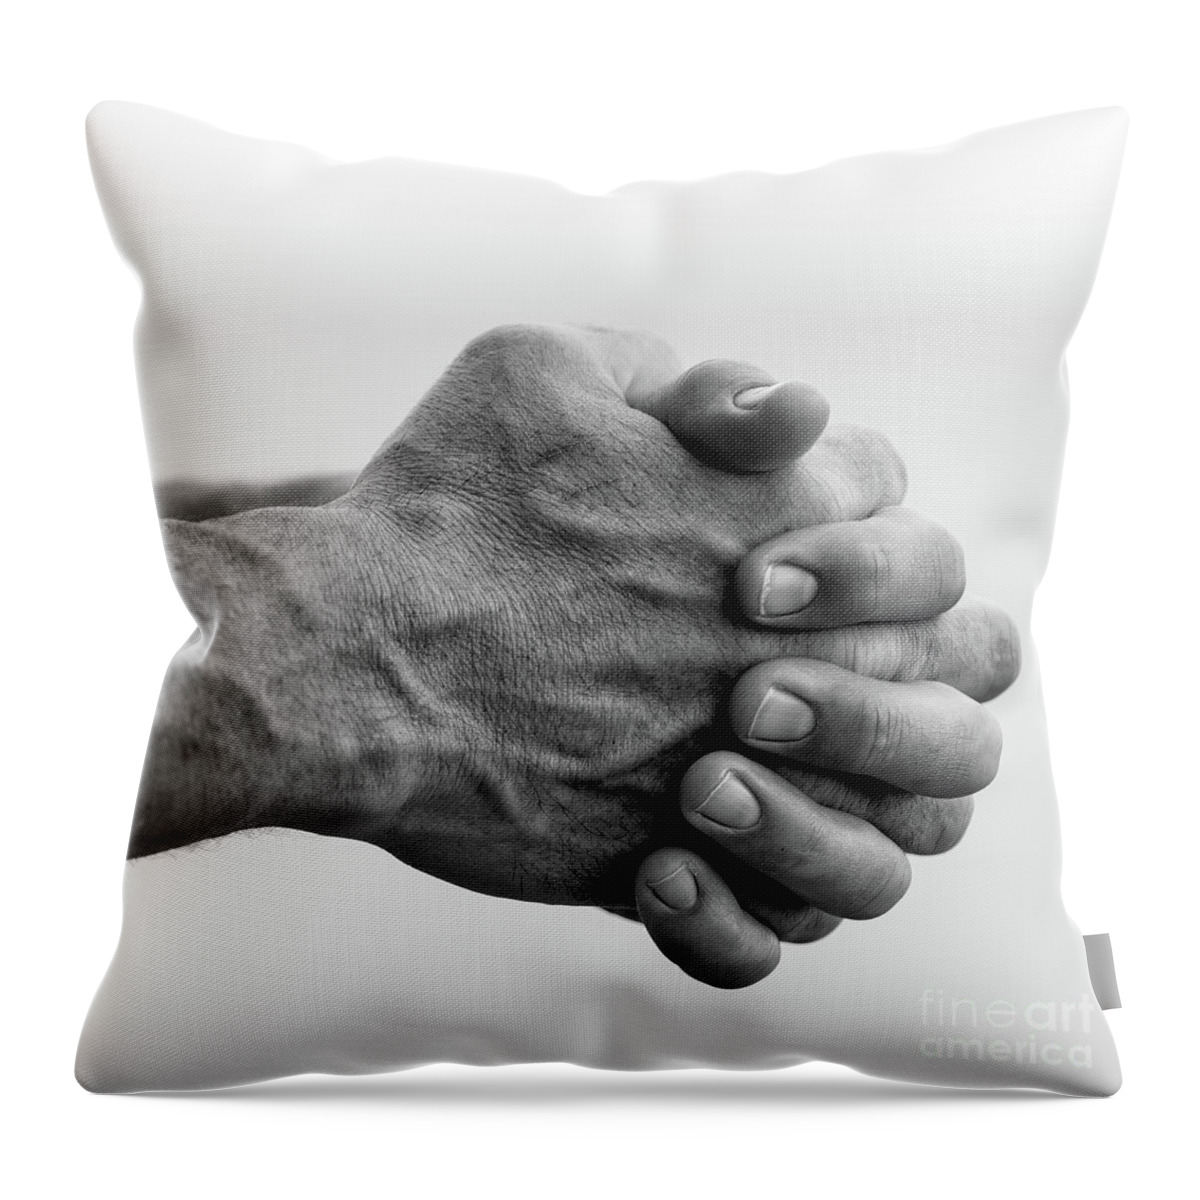 Hands Throw Pillow featuring the photograph Kind Hands by Doug Sturgess